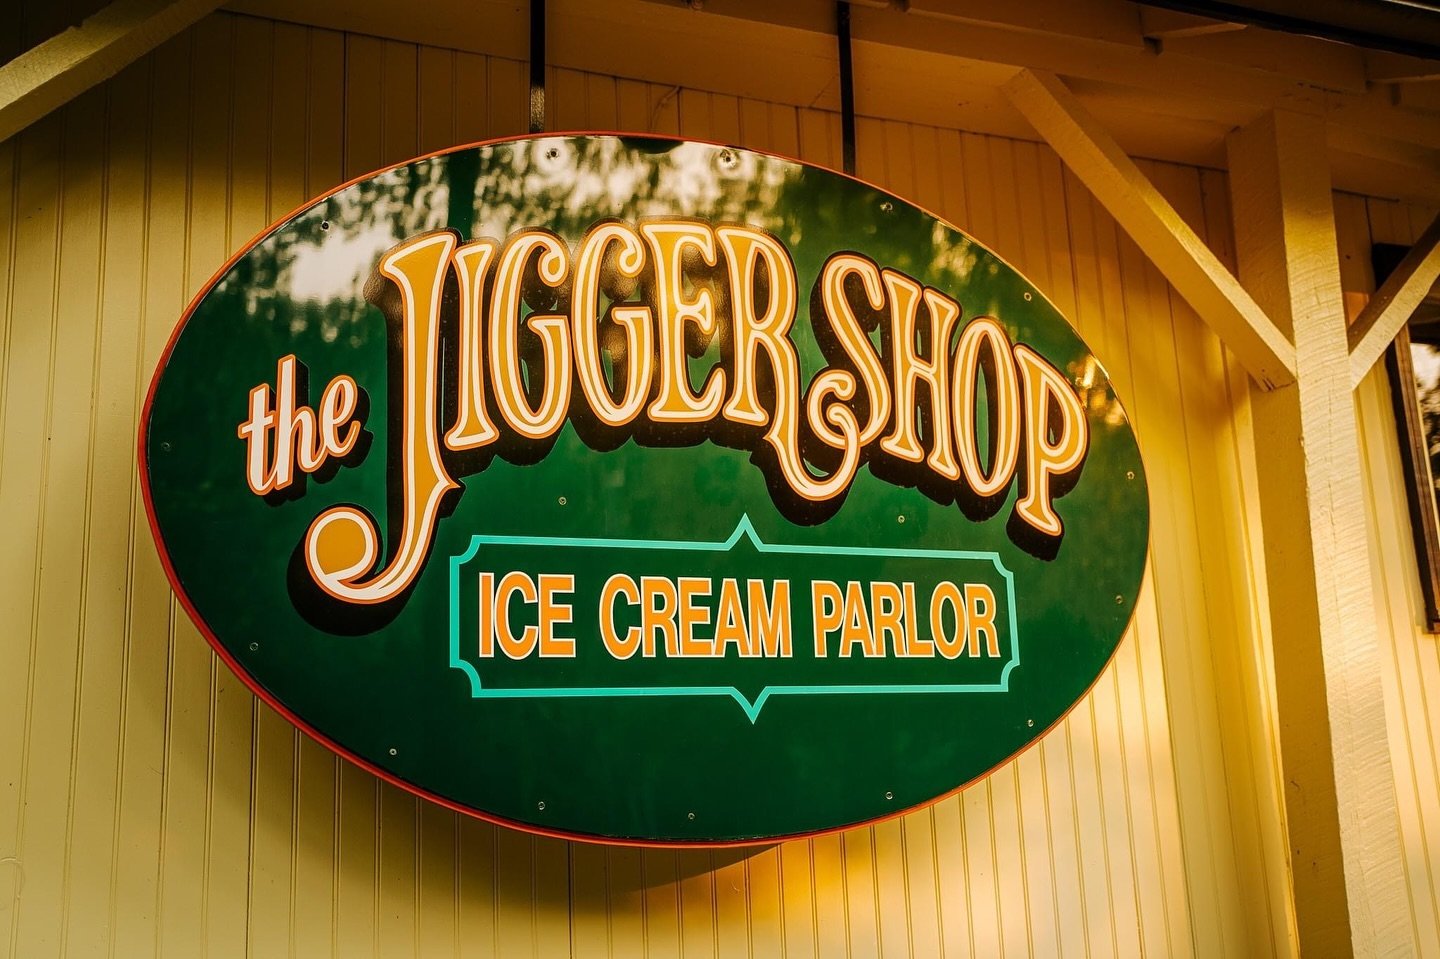 It all starts TOMORROW! The Jigger Shop will be opening its doors for our 129th season tomorrow, May 11th, and we want you to be there! Come say hi from noon to 9pm!